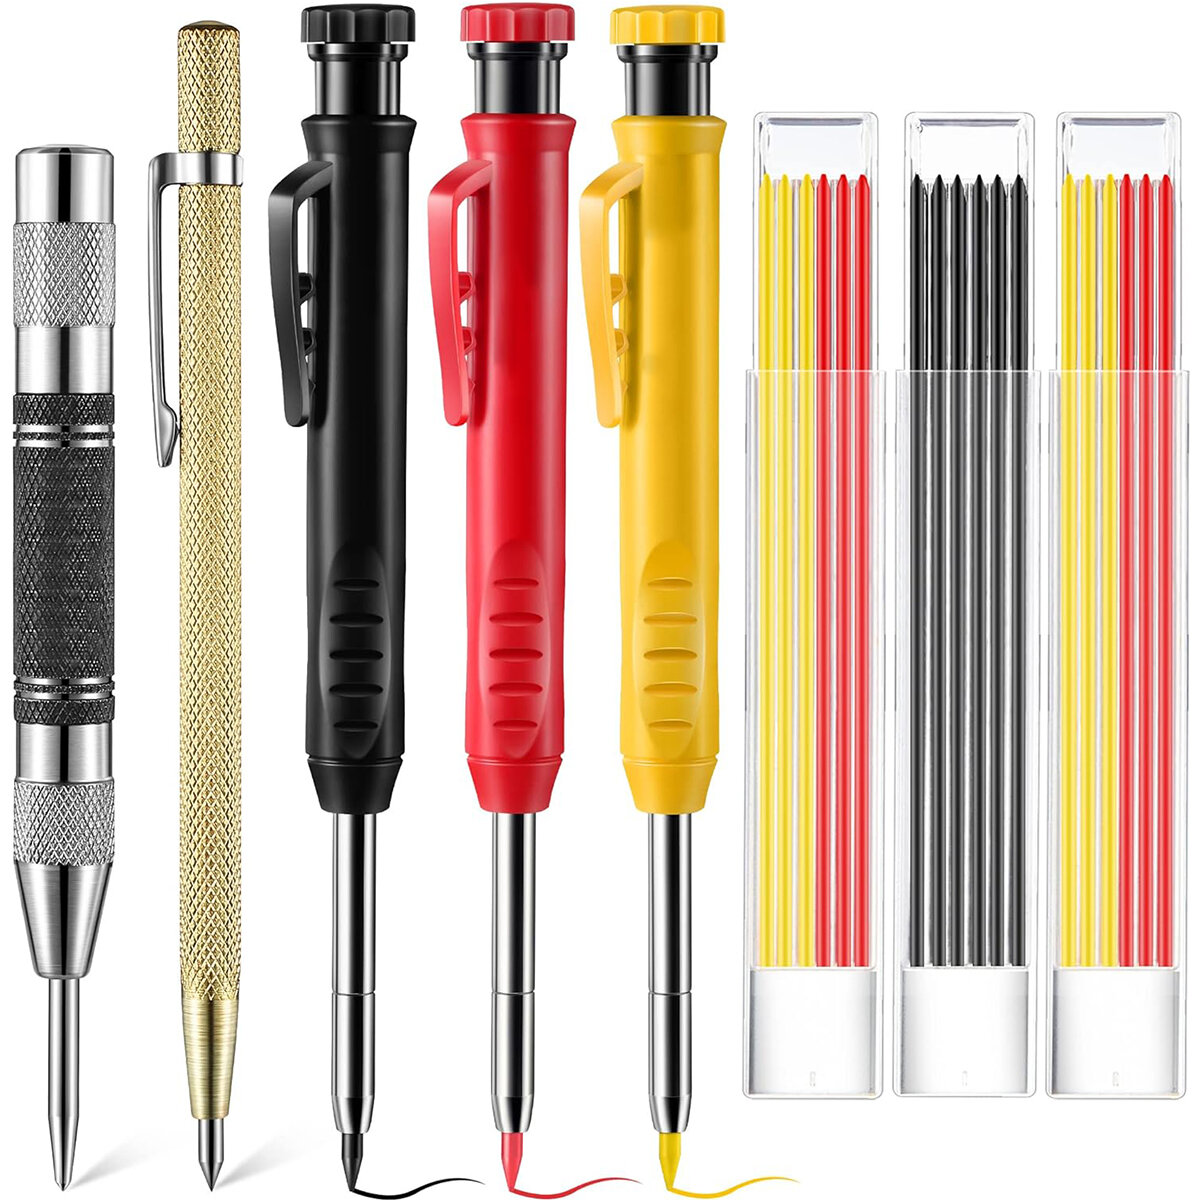 

8 Pack Carpenter Pencil Set with Deep Hole Marker Built-in Sharpener and Carbide Scribe Marking Tool for Woodworking Mar